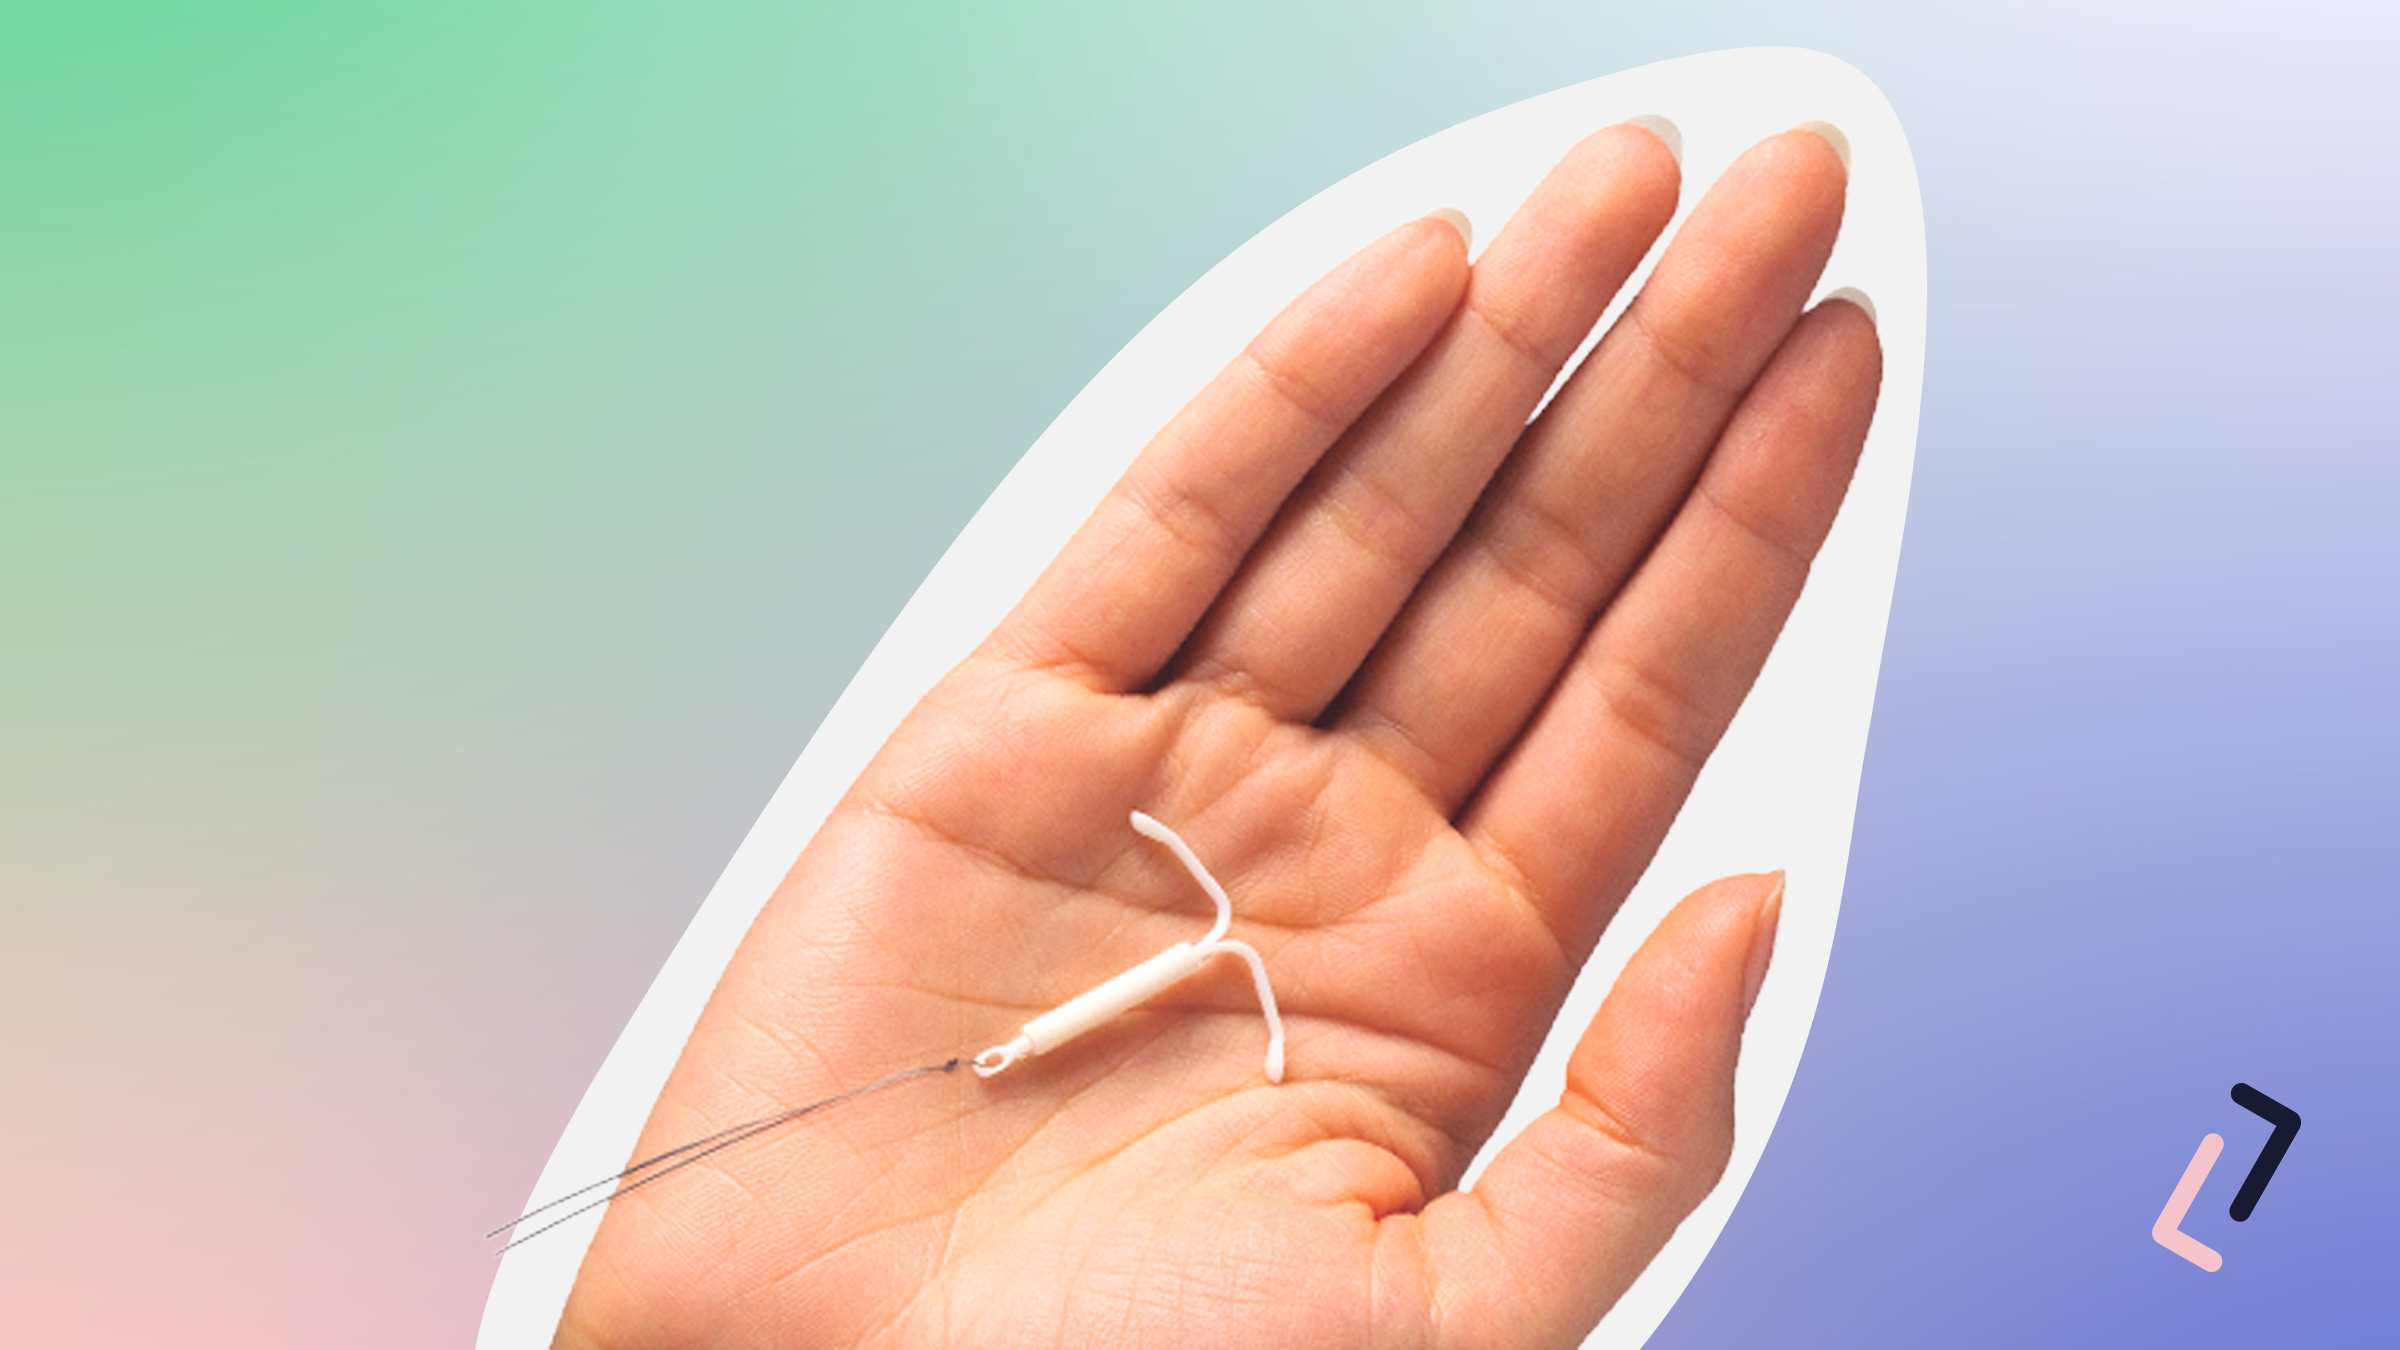 Why does IUD insertion hurt so much? Doctors don't always warn about pain